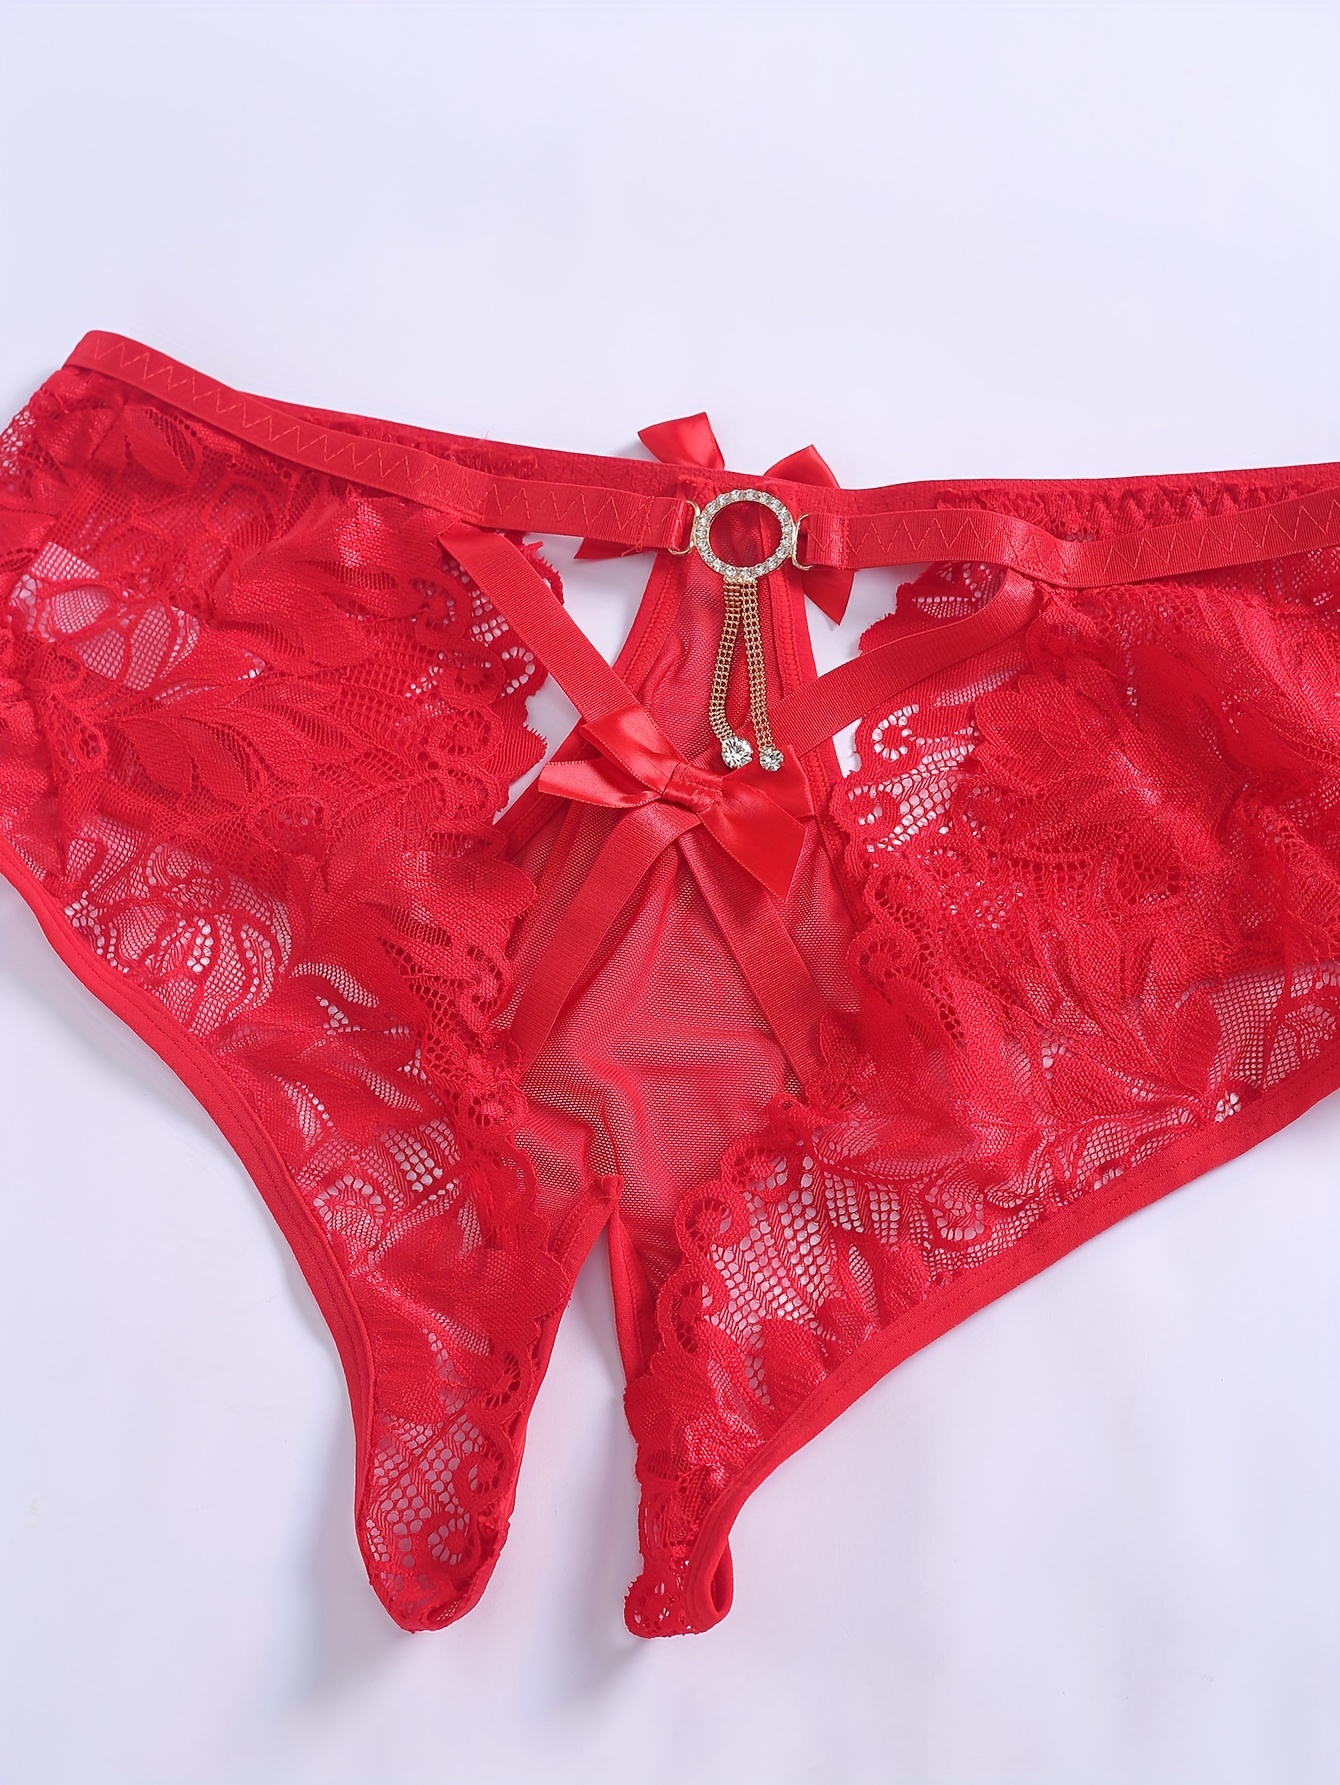 Briefs Panties Sexy Open Crotch Plus Size Red Underpants Ladies